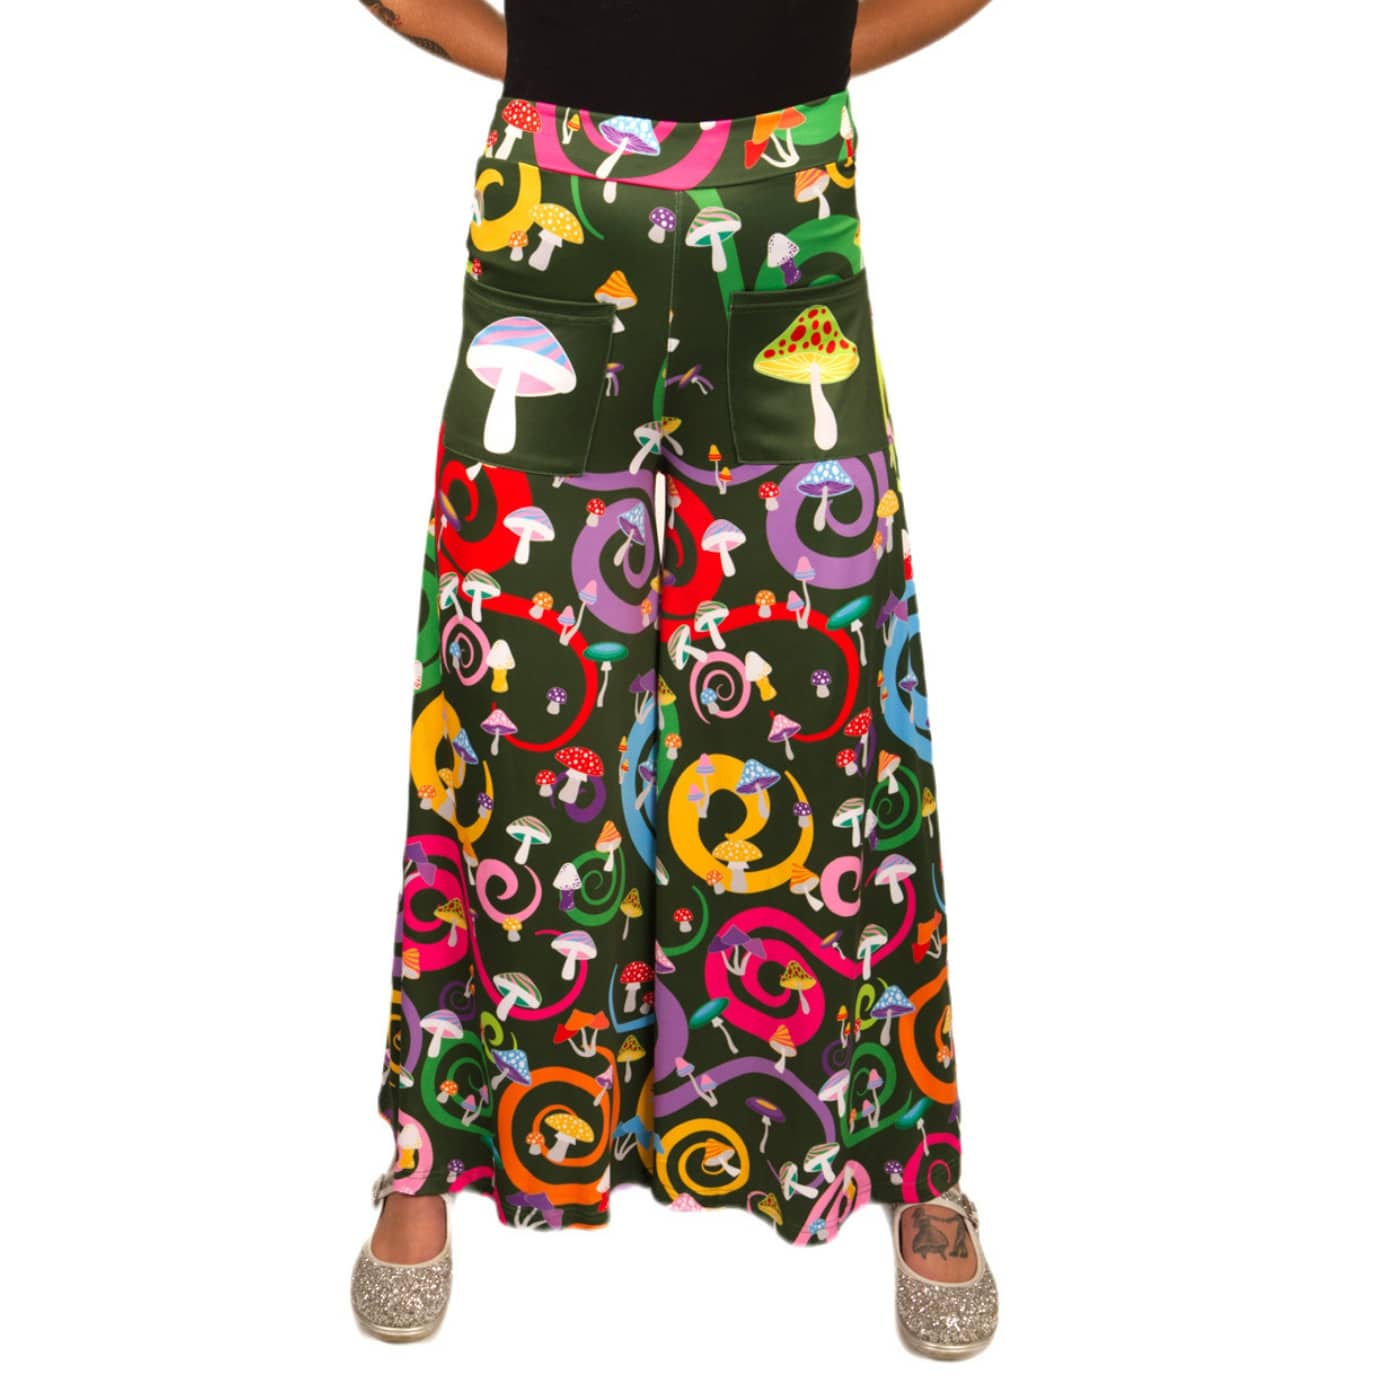 Toadstool Wide Leg Pants by RainbowsAndFairies.com.au (Mushroom - Psychedelic Swirl - Woodstock - Vintage Inspired - Flares - Pants With Pockets) - SKU: CL_WIDEL_TOADS_ORG - Pic-01